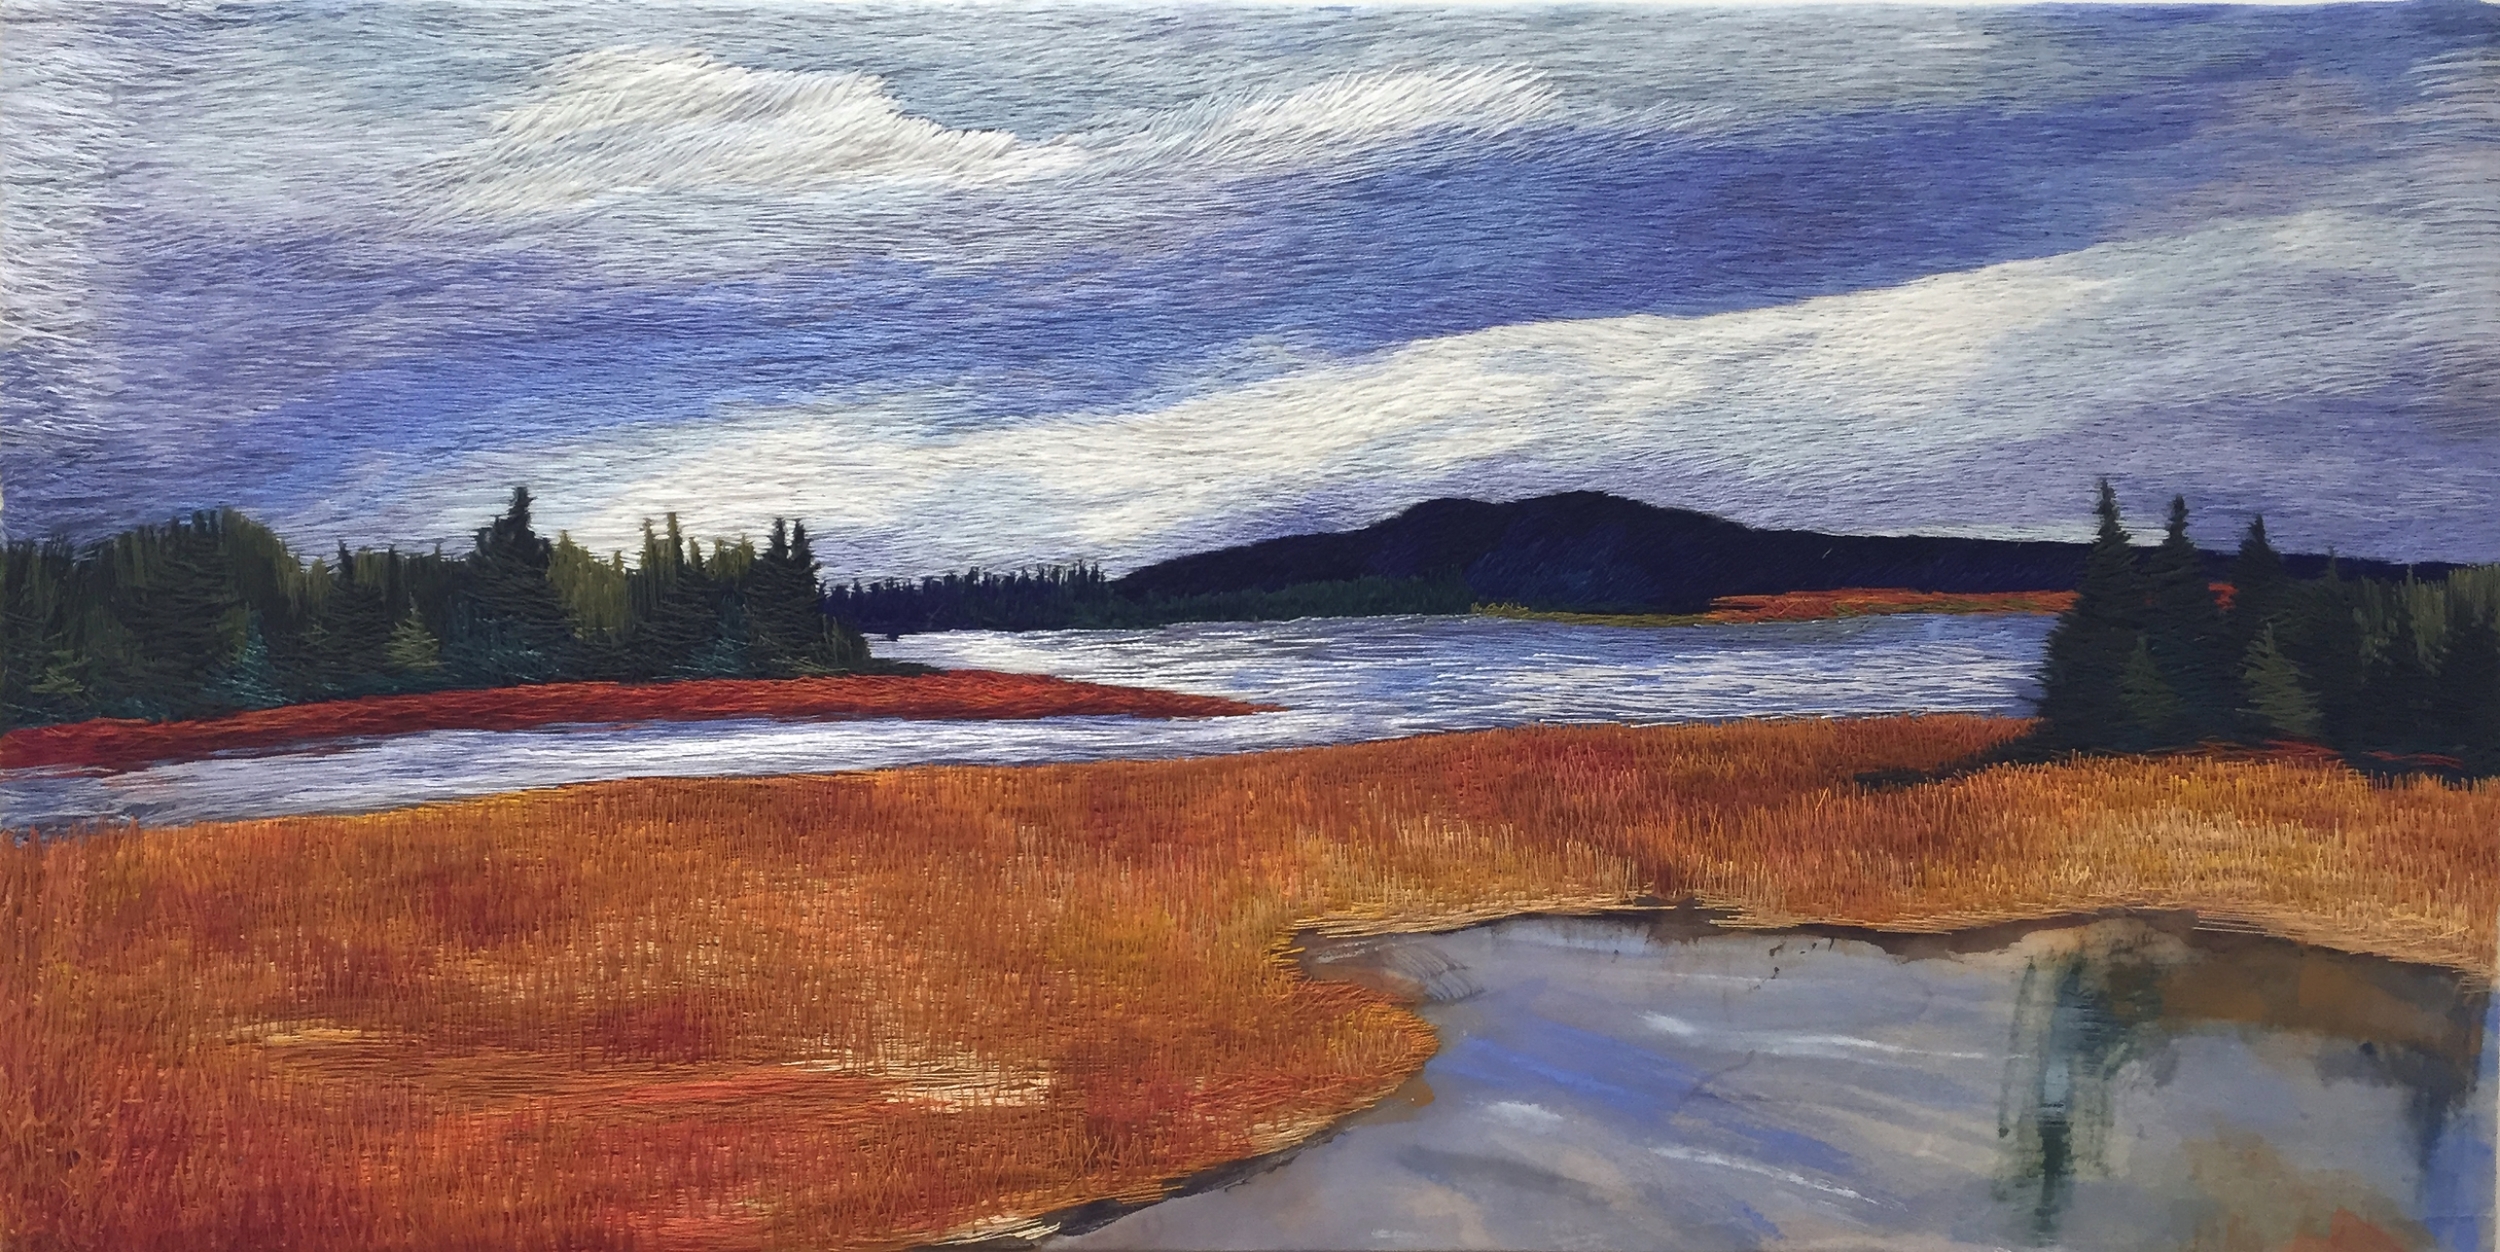 Salt Marsh, Tremont, Mount Desert Island, ME, Embroidered cotton thread and ink on silk, 12" x 24" 2015-2016, In private collection